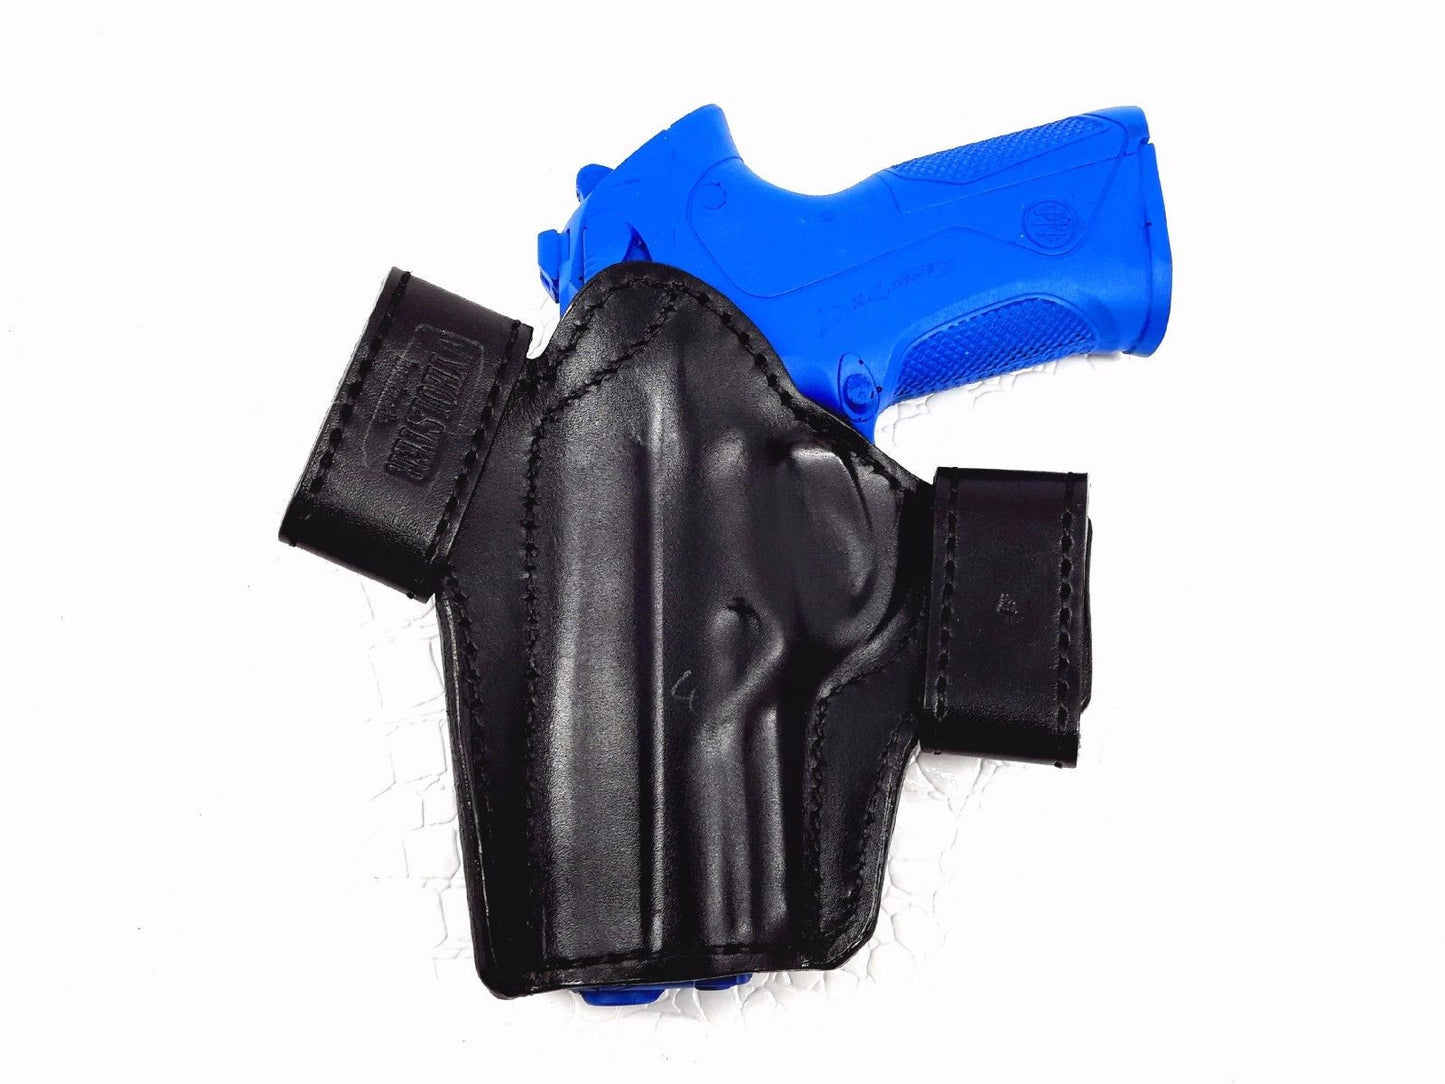 Snap-on Holster for Bersa Thunder Ultra Compact 45 ACP, MyHolster